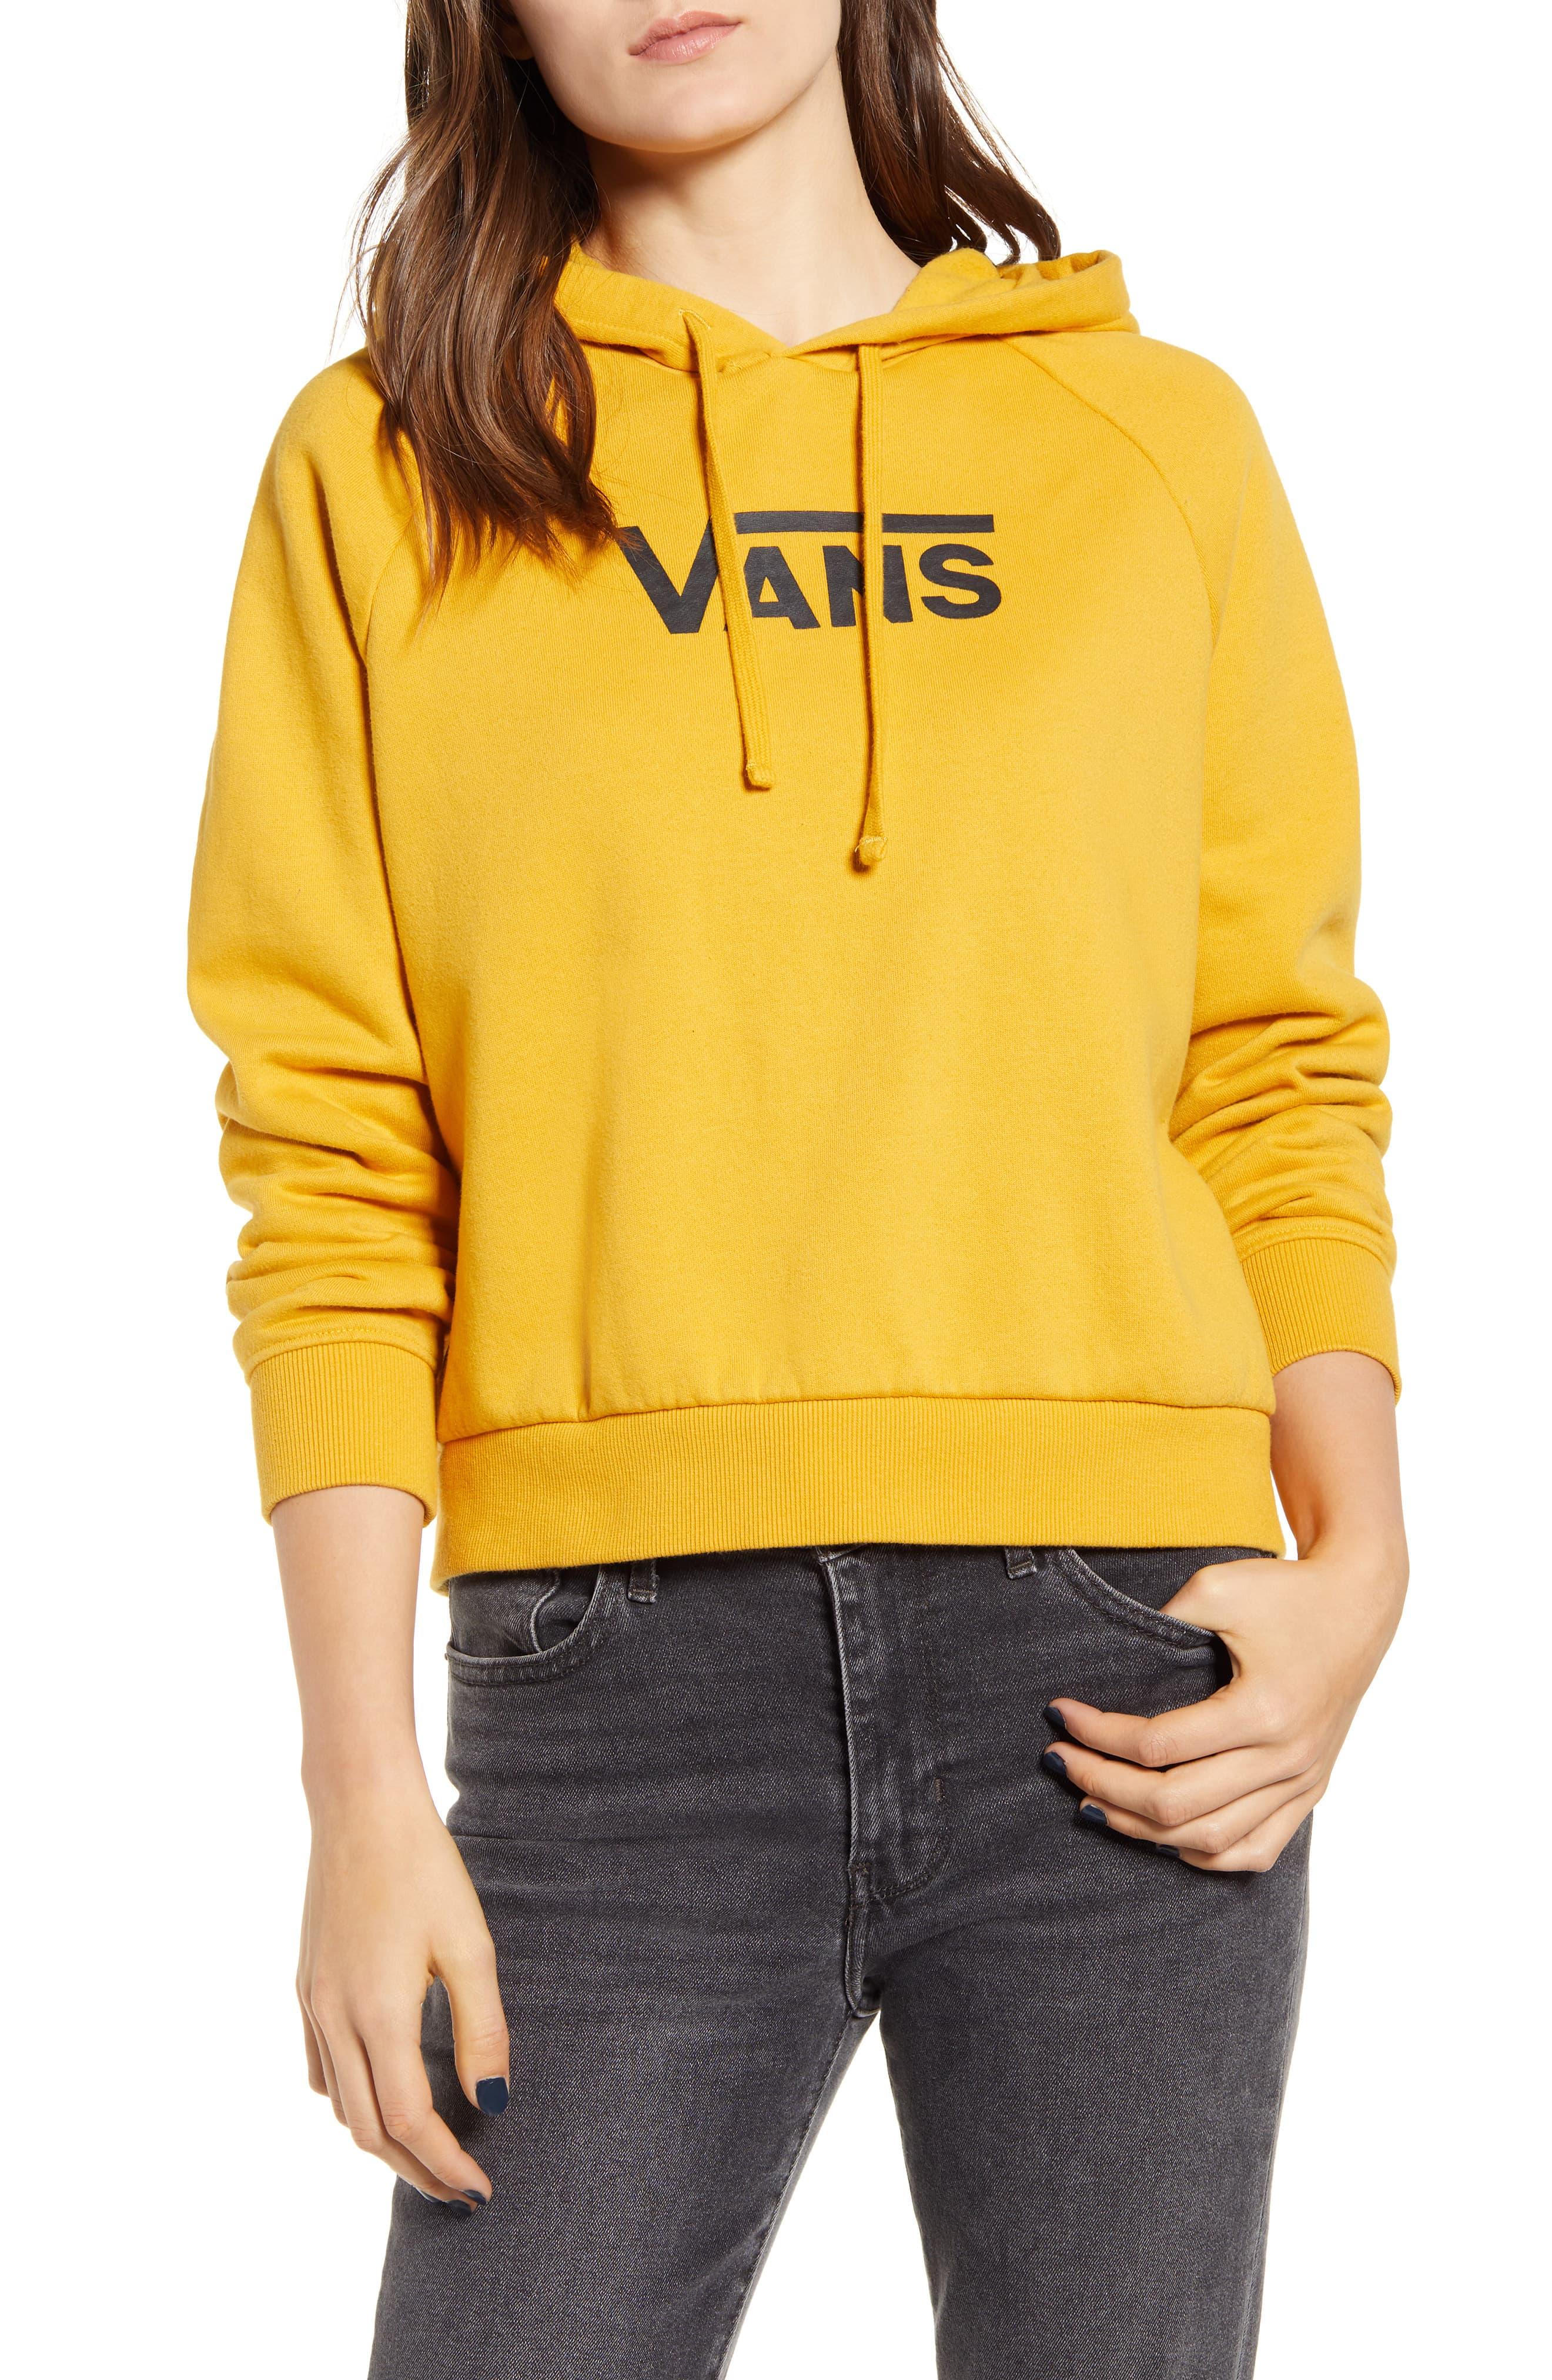 vans hoodie yellow Online Shopping for 